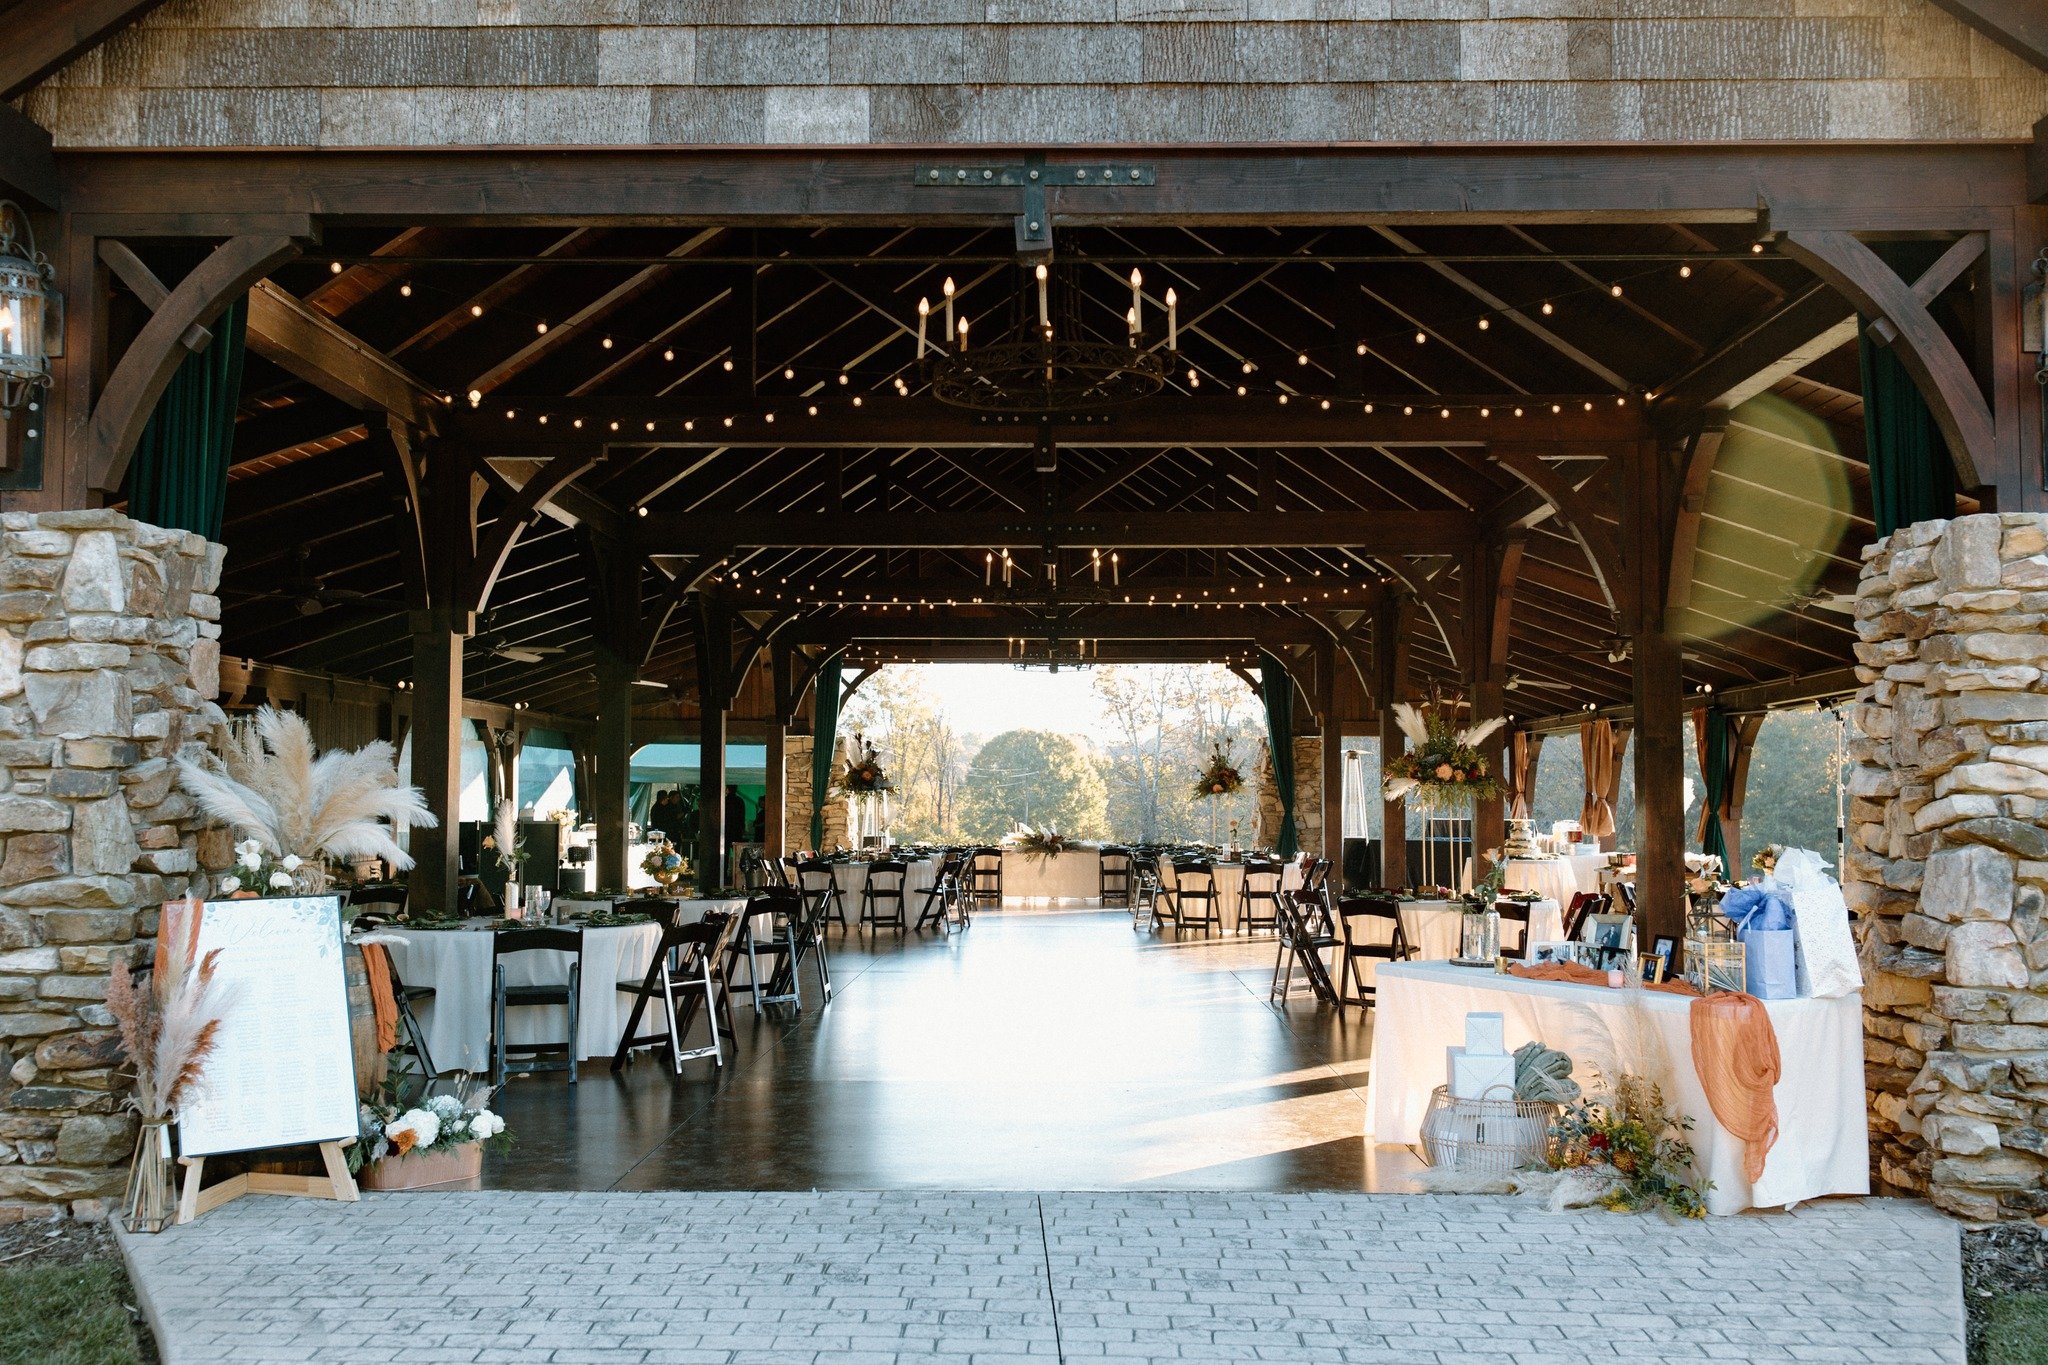 Discover why Green Gables Farm stands out as one of the most budget-friendly venues in Charlotte.✨ Offering...

✅Outdoor and indoor ceremony choices.
✅A vast collection of over 3,000 trendy decor pieces
✅and clear, transparent rental rates

We ensure